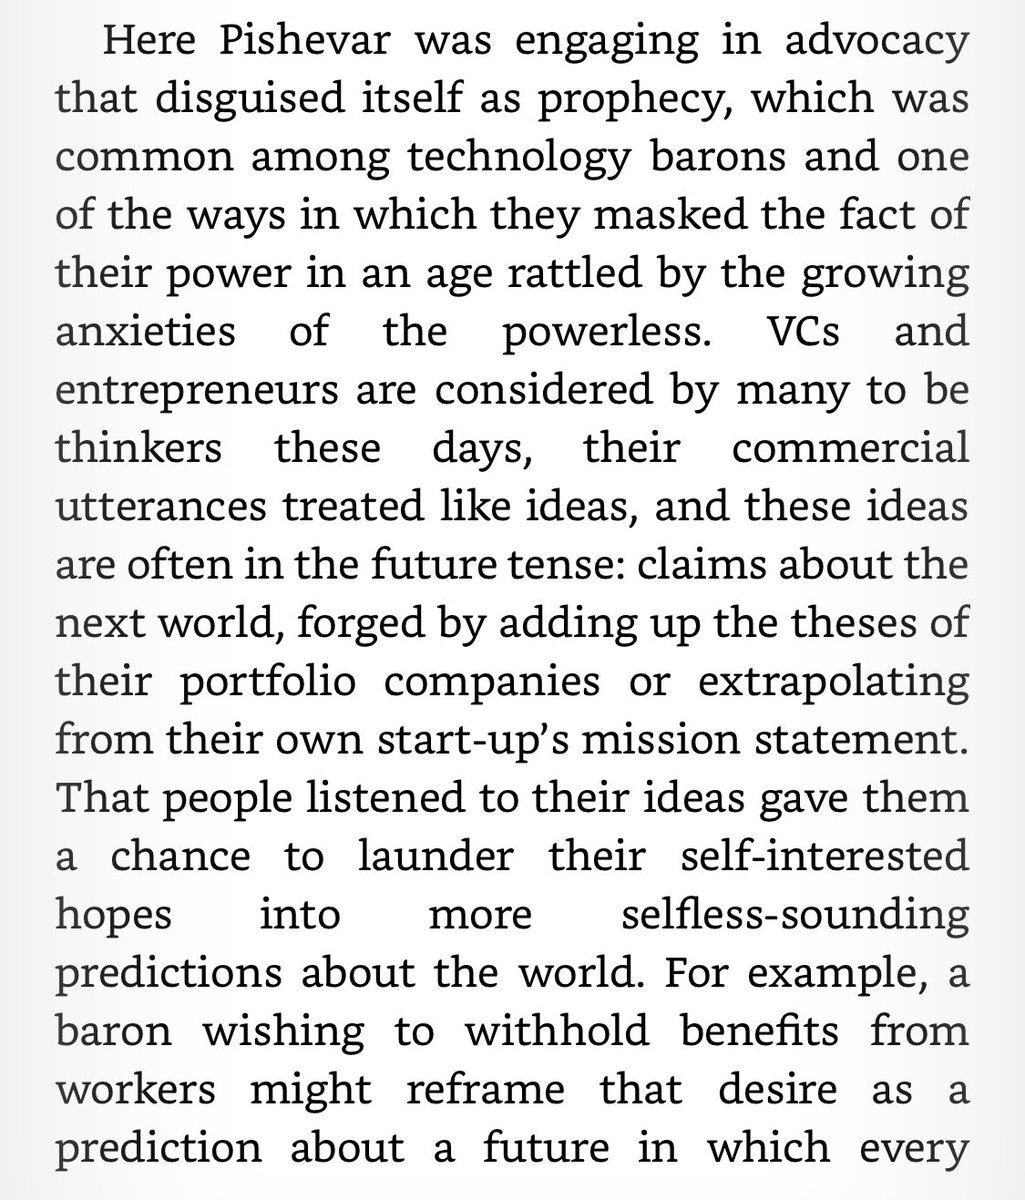 In  @winnerstakeall, I try to dissect the central move of VC Thought Leadership: prophecy as advocacy.VCs TEDsplain big thoughts about the future, disguising their lobbying for a particular kind of future that would benefit them with the language of prediction.